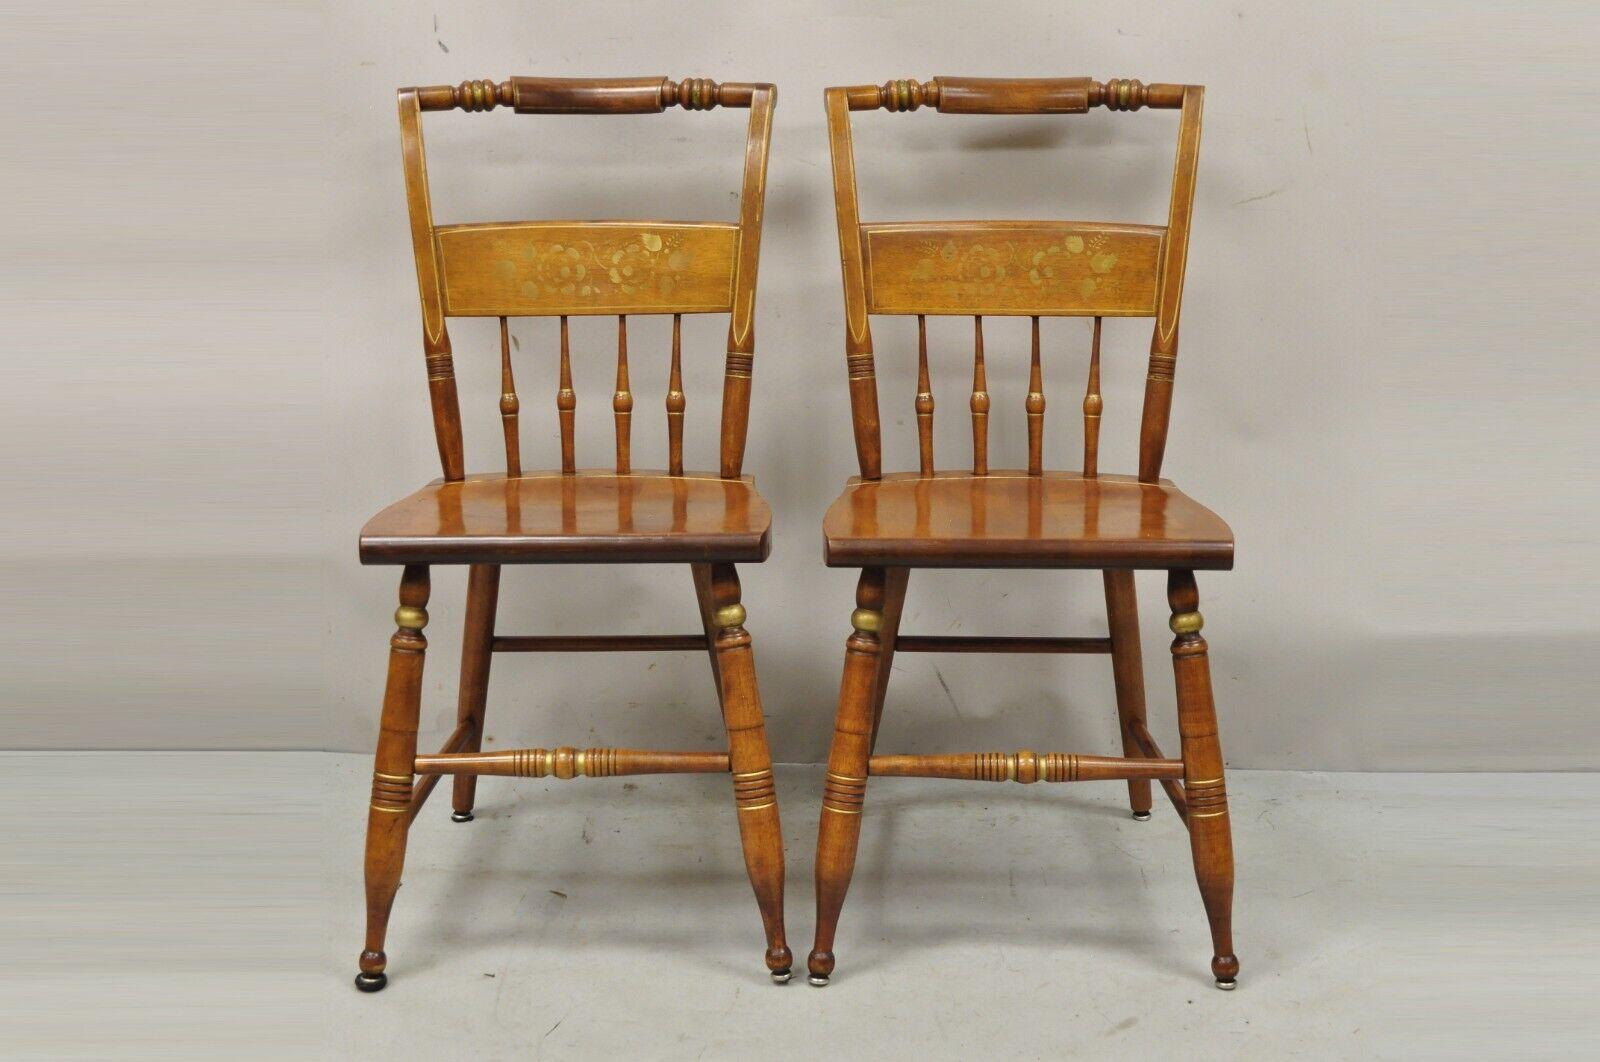 Vintage S. Bent Bros Maple Wood Hitchcock Colonial Style chairs - a Pair. Item features gold painted accents, solid wood construction, beautiful wood grain, original stamp, very nice vintage pair. Circa Early 20th Century. Measurements: 34